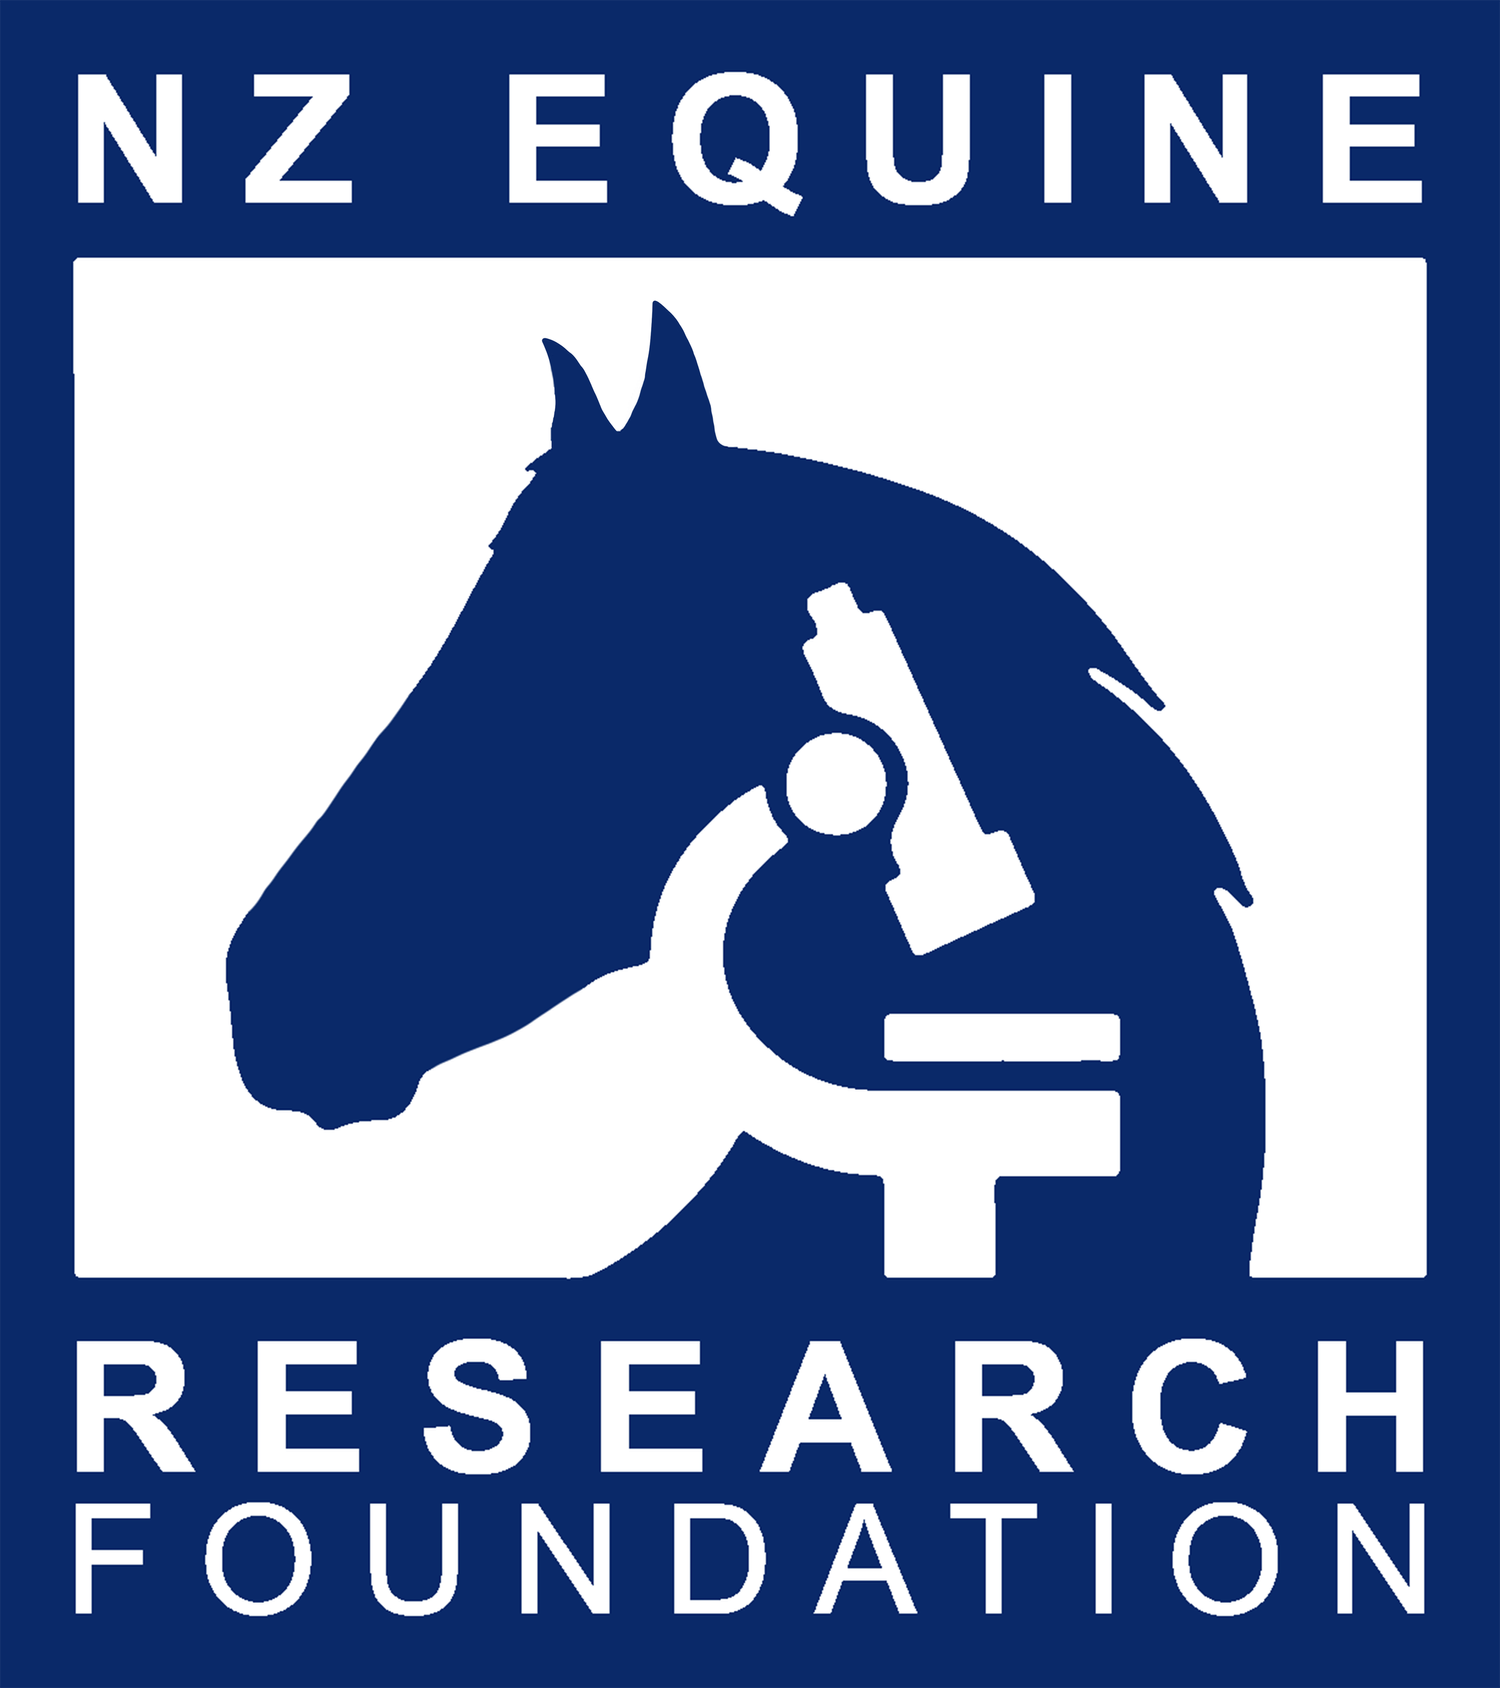 New Zealand Equine Research Foundation